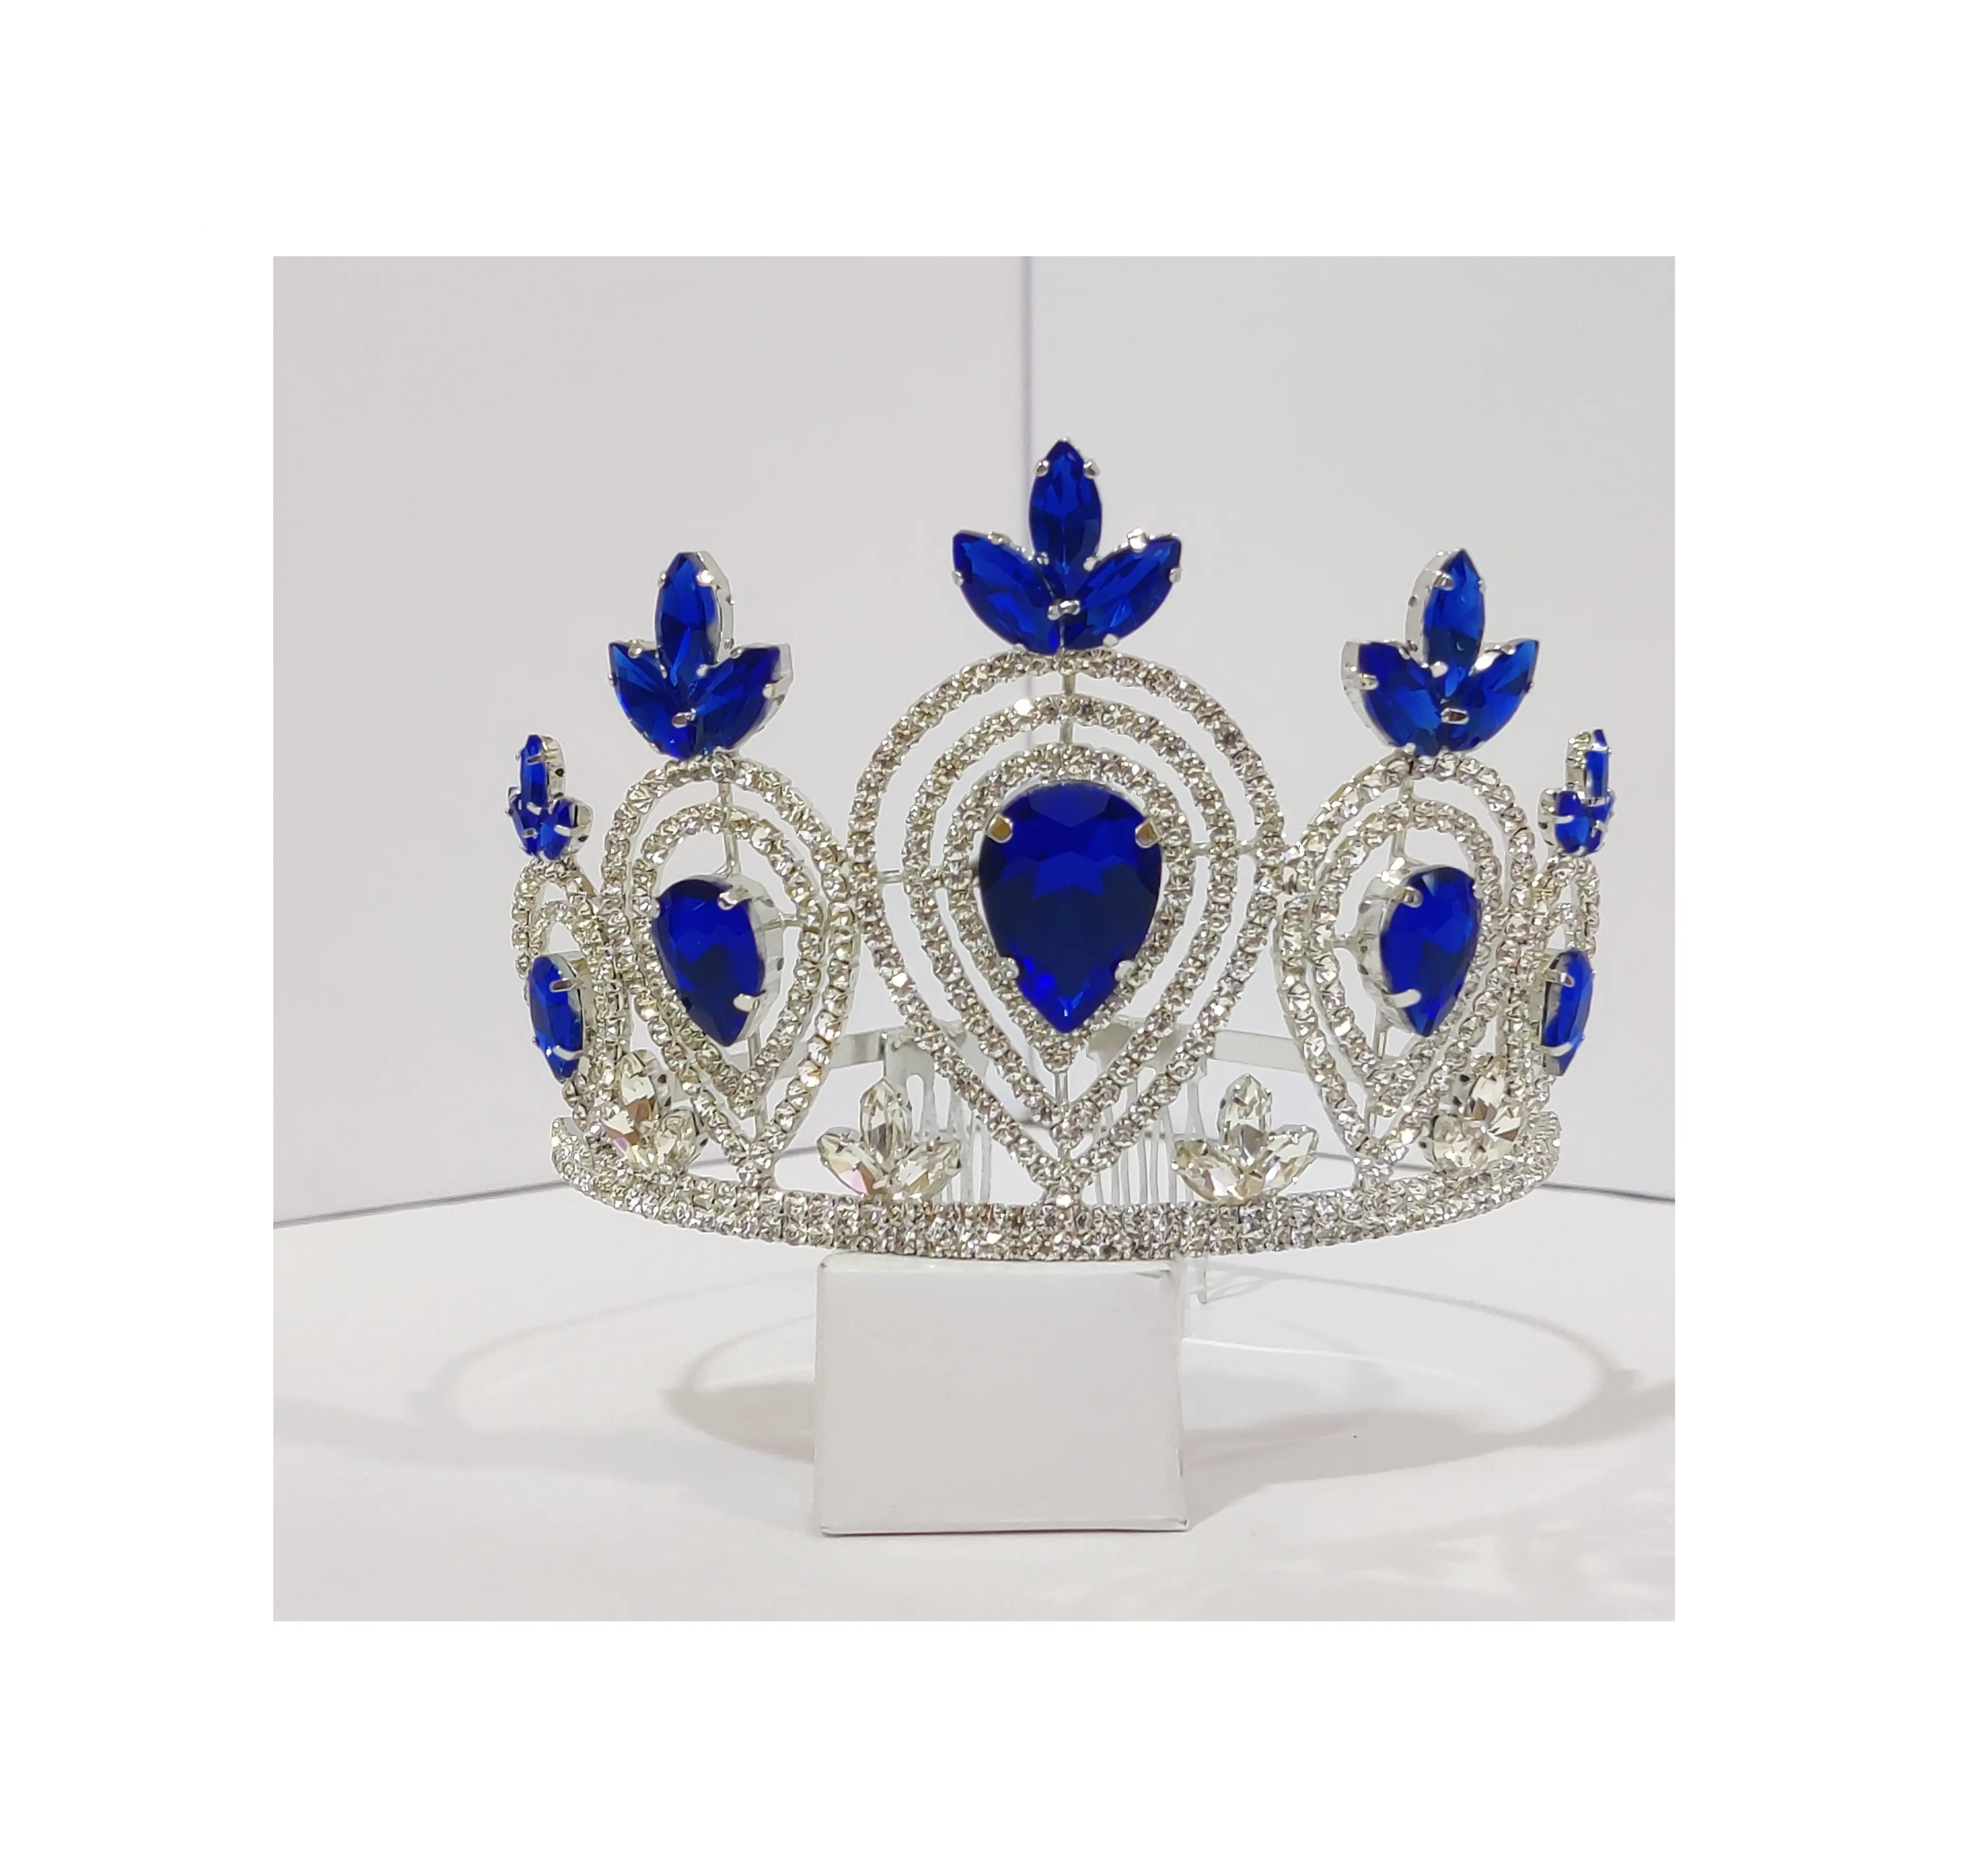 Beauty Custom Crown Rhinestone Pageant Tall Crowns Crystal Adjust Contour Band Miss Big Tiara from India